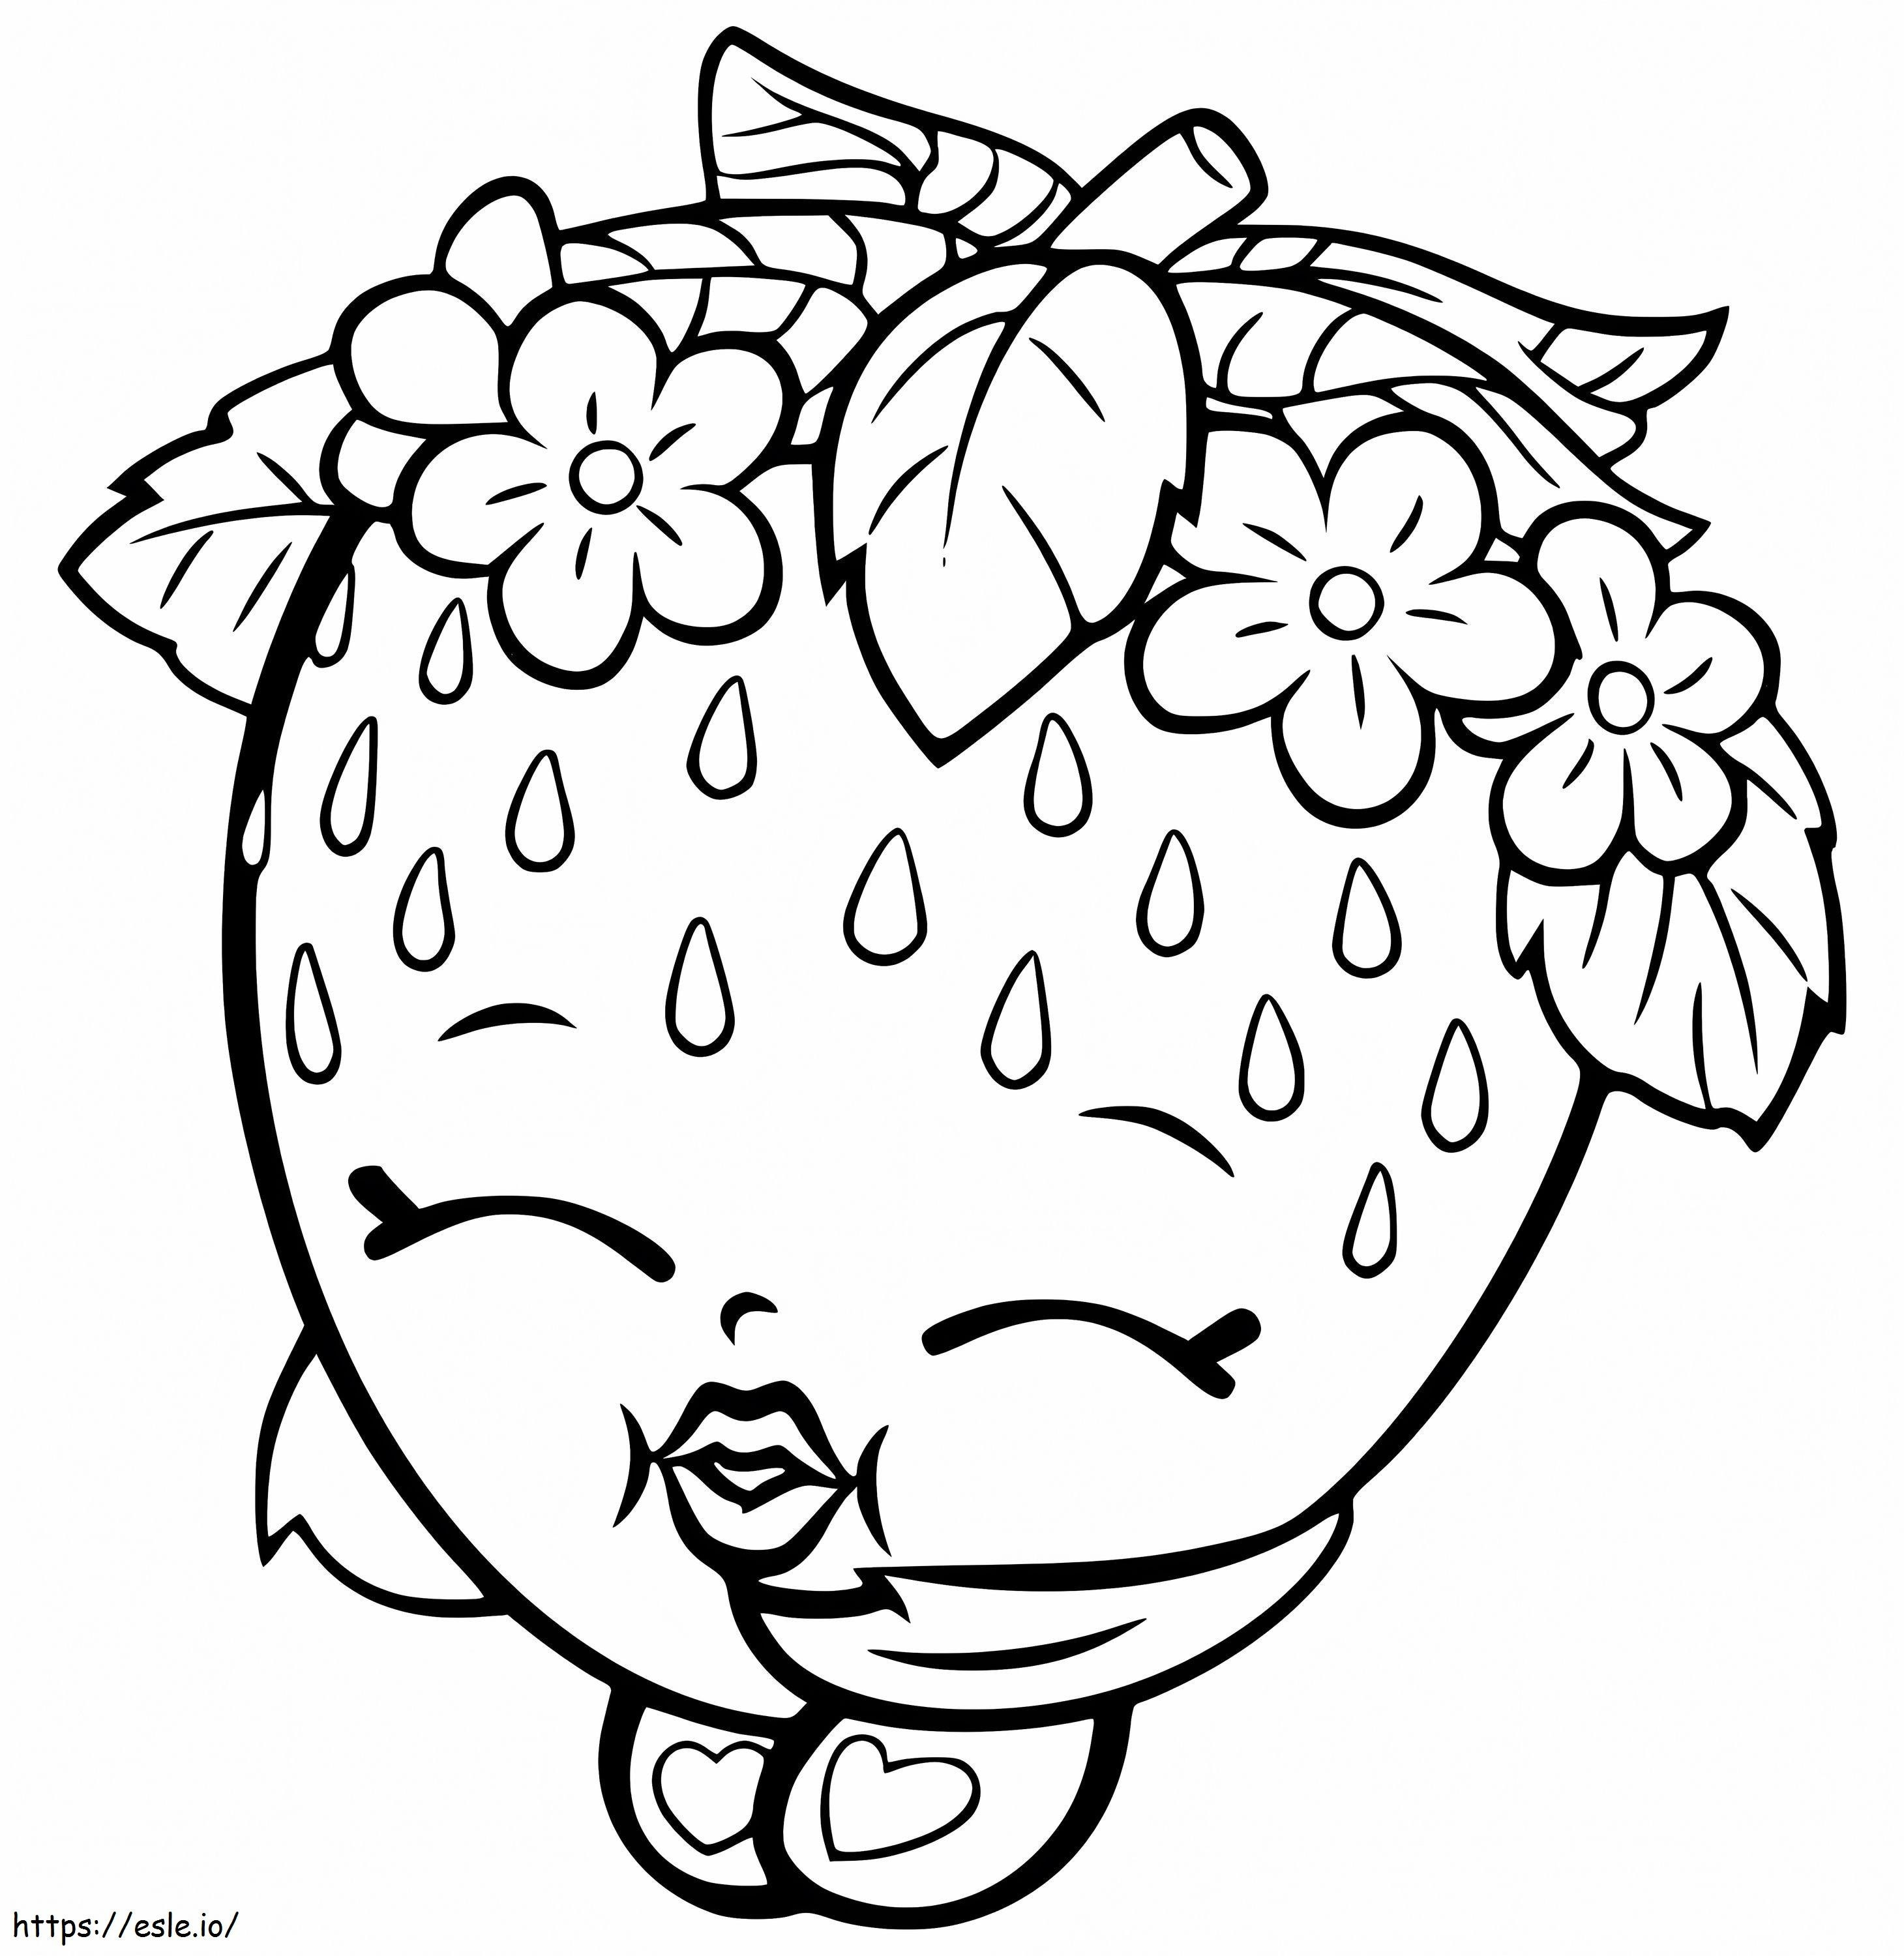 Cute Cartoon Strawberry coloring page